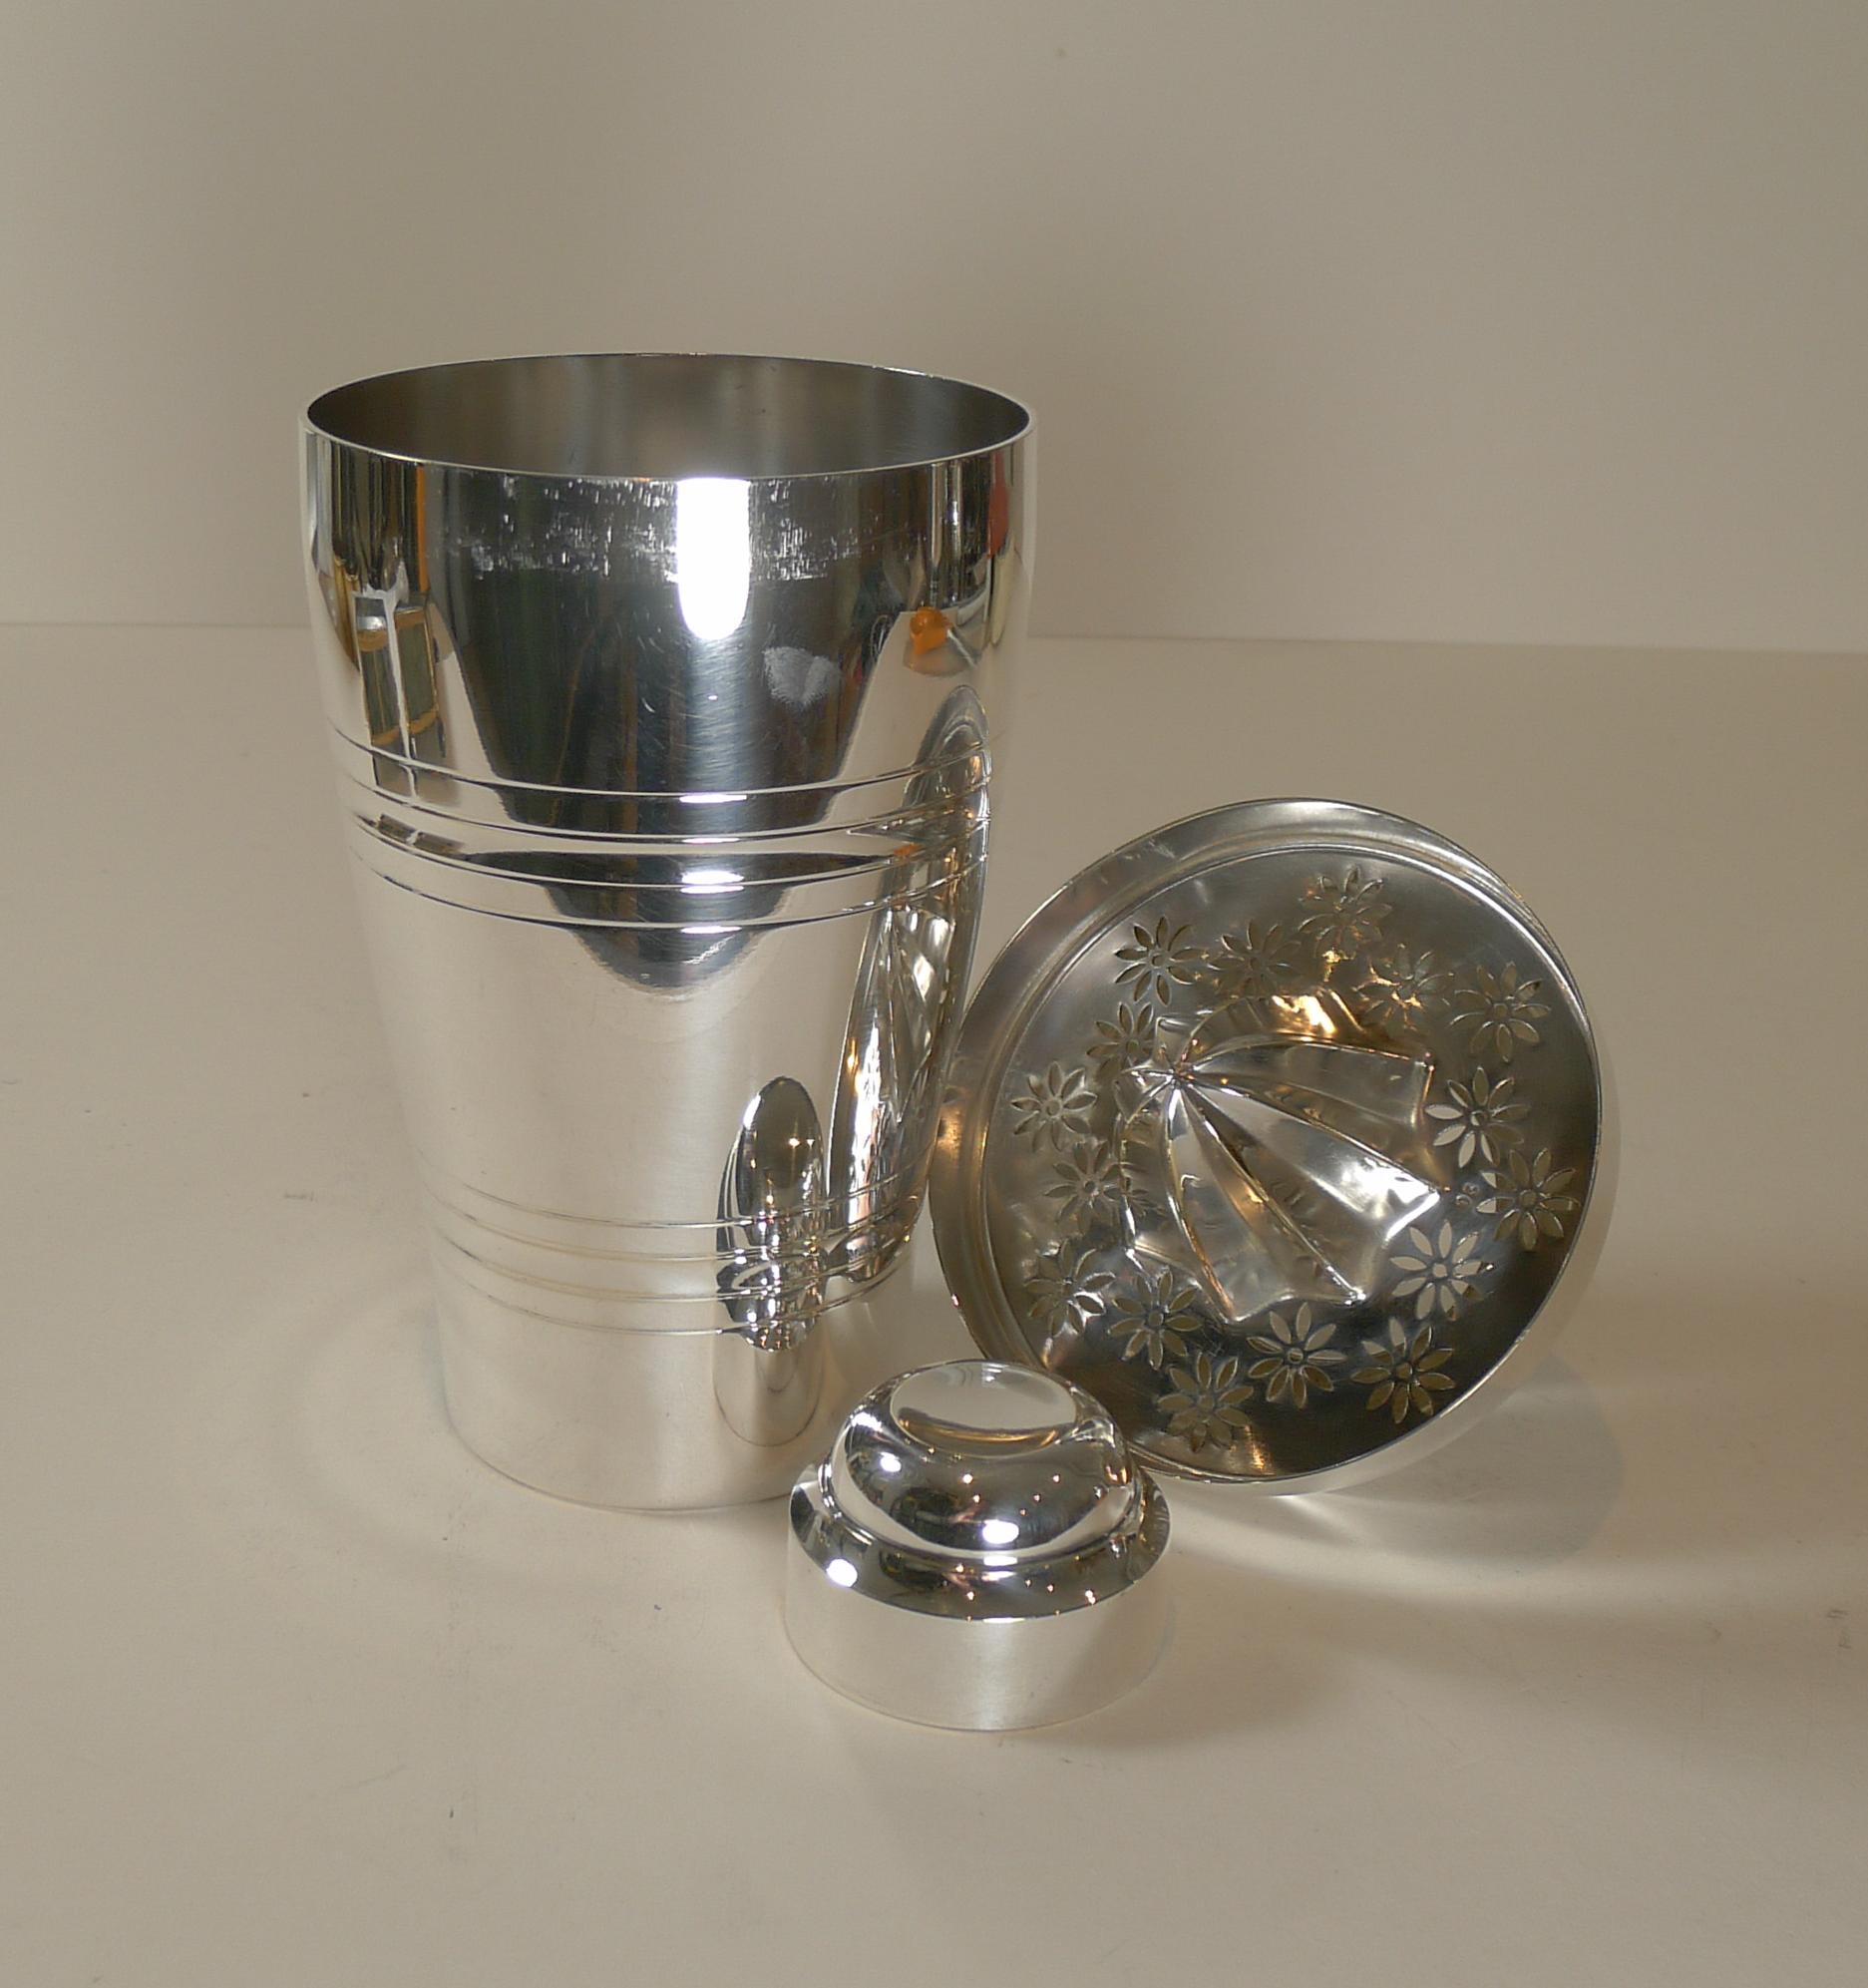 French Art Deco Cocktail Shaker with Lemon Reamer c.1930 by St. Medard, Paris For Sale 4